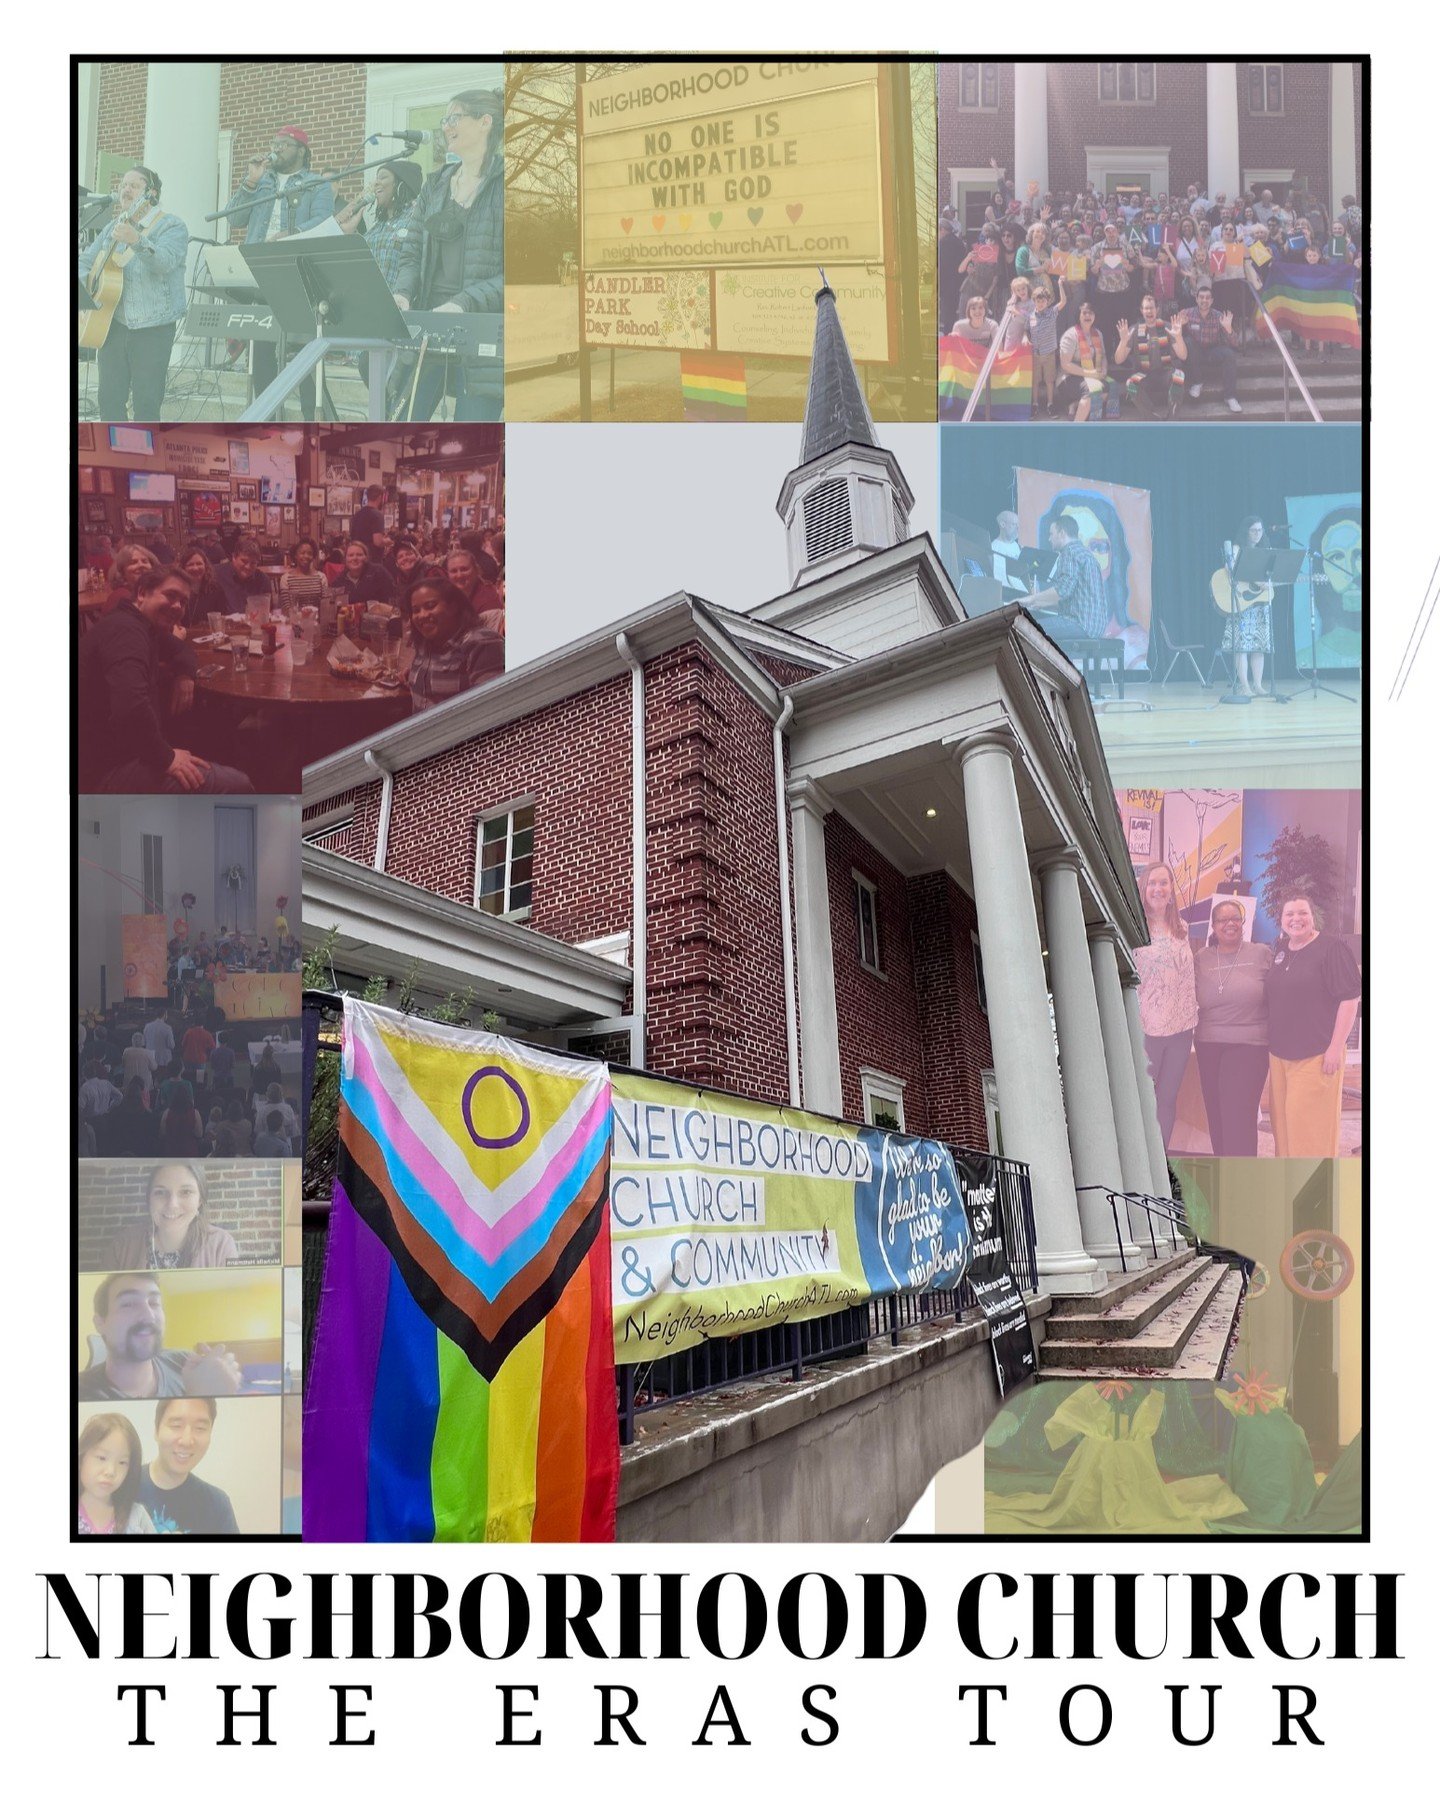 We'll be celebrating the past 8 years of this new, becoming, and living community we've created called Neighborhood Church tomorrow, Sunday May 19 at 11 am during worship! There will be music, pictures, stories, cake, laughter, and dreaming about the